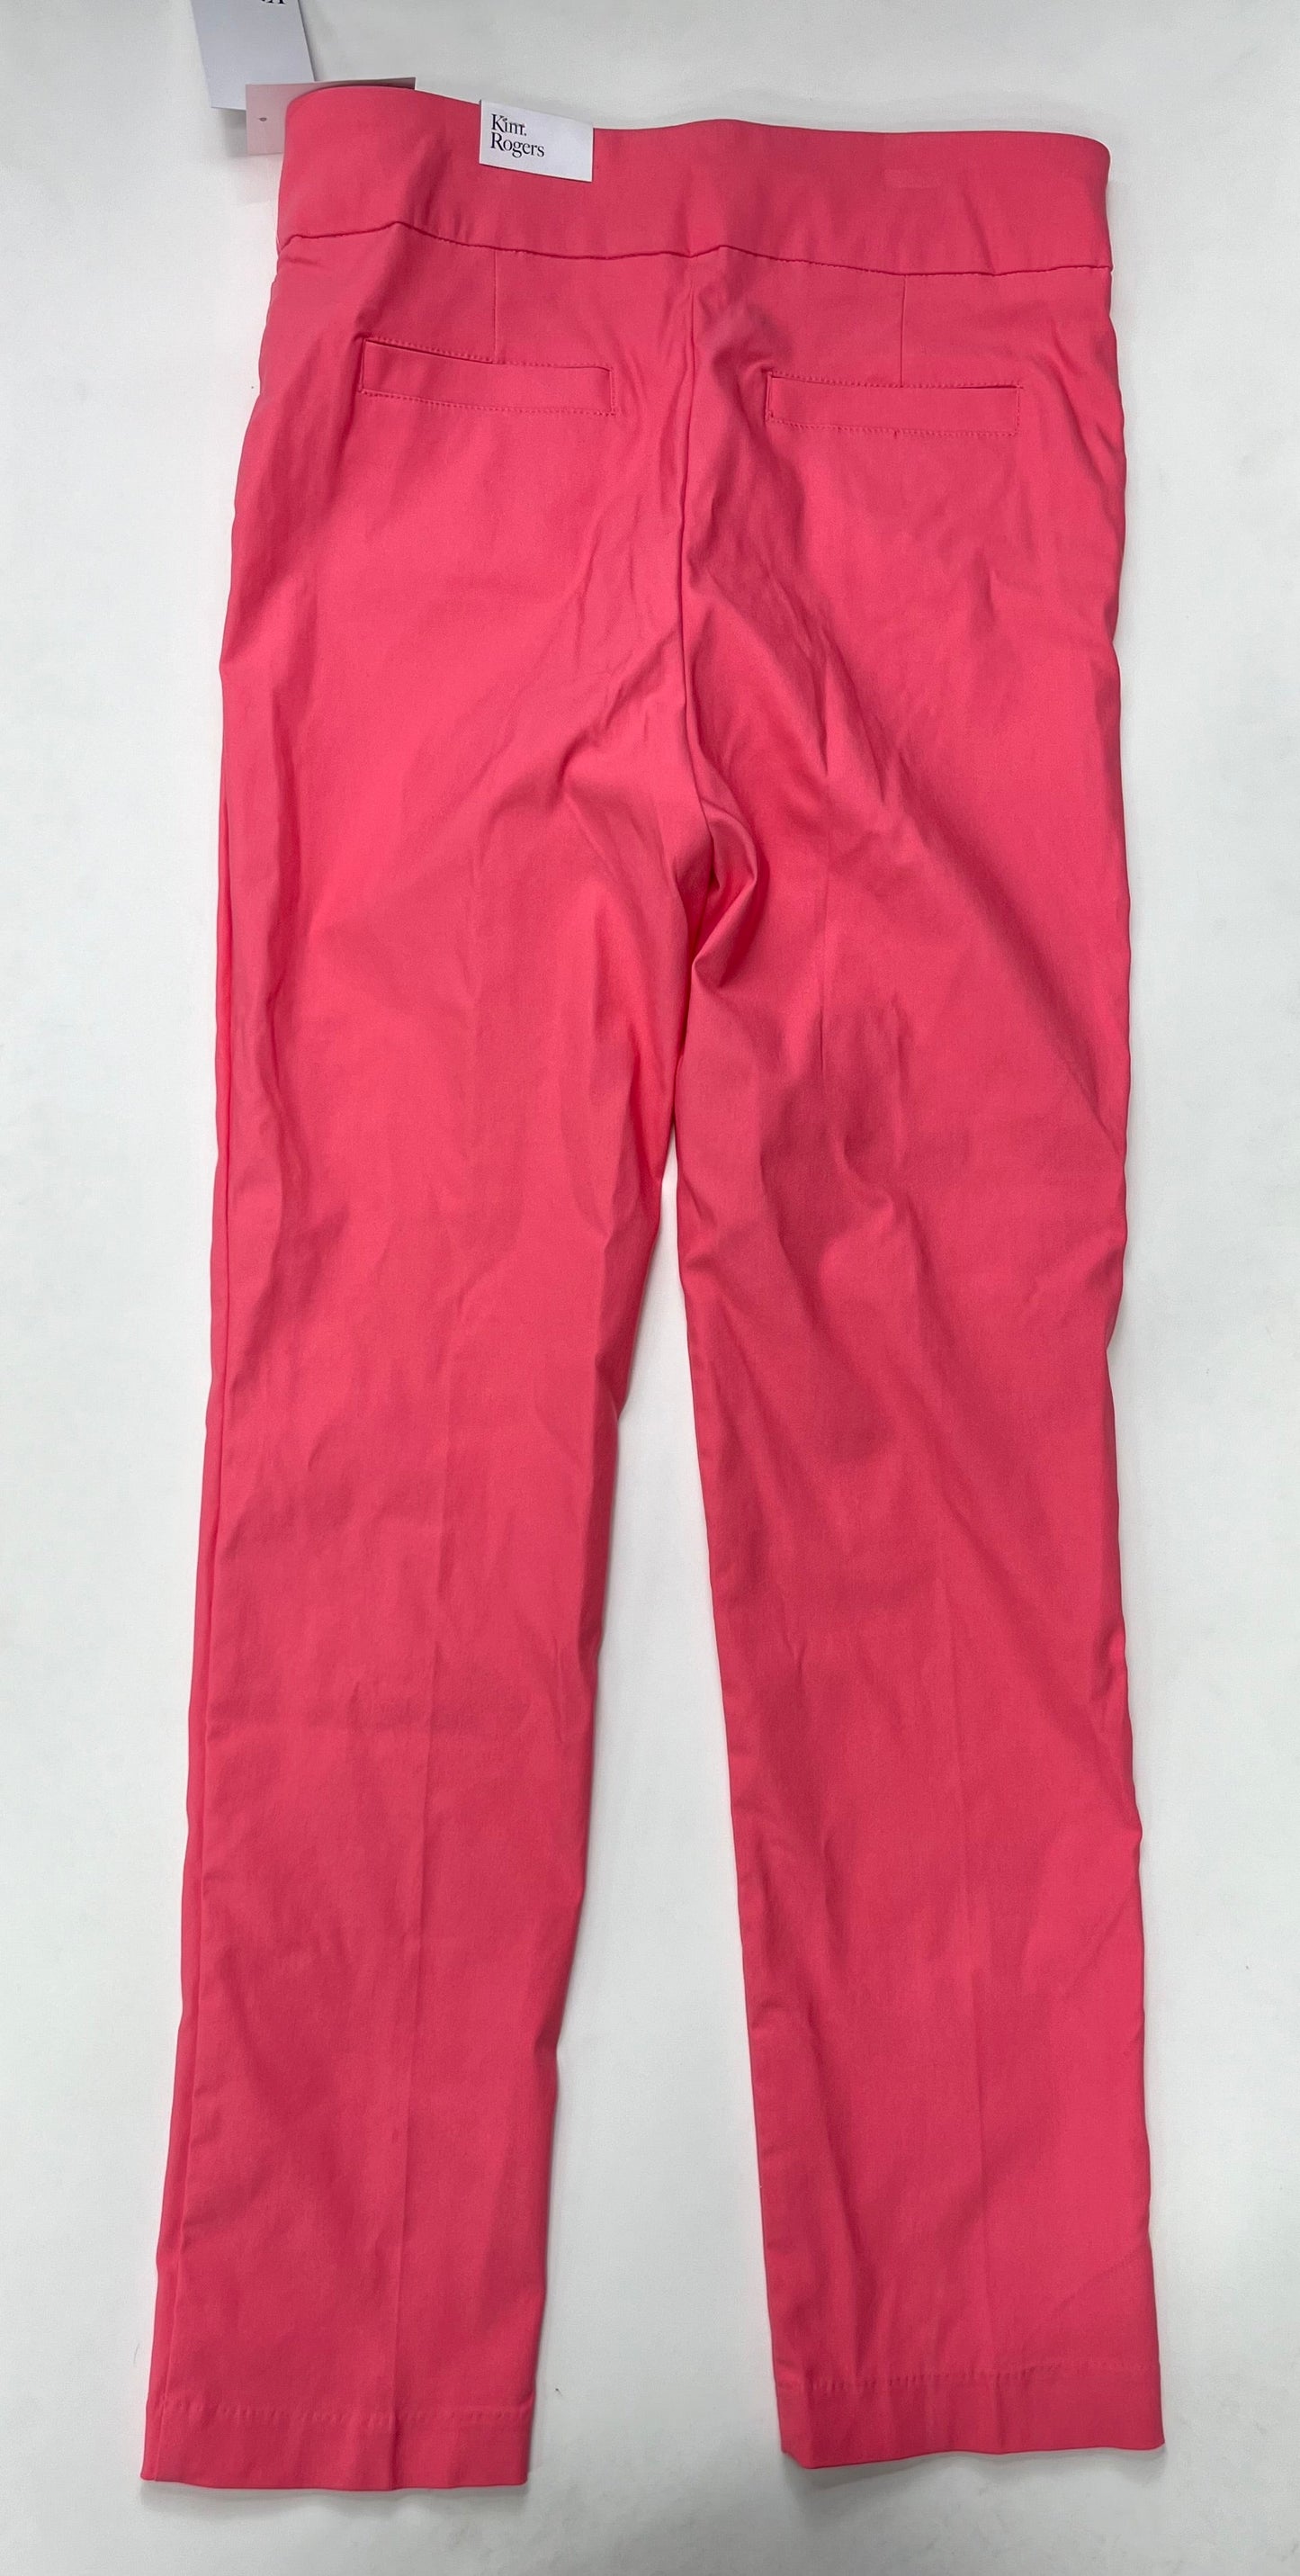 Pants Ankle By Kim Rogers NWT Size: 10